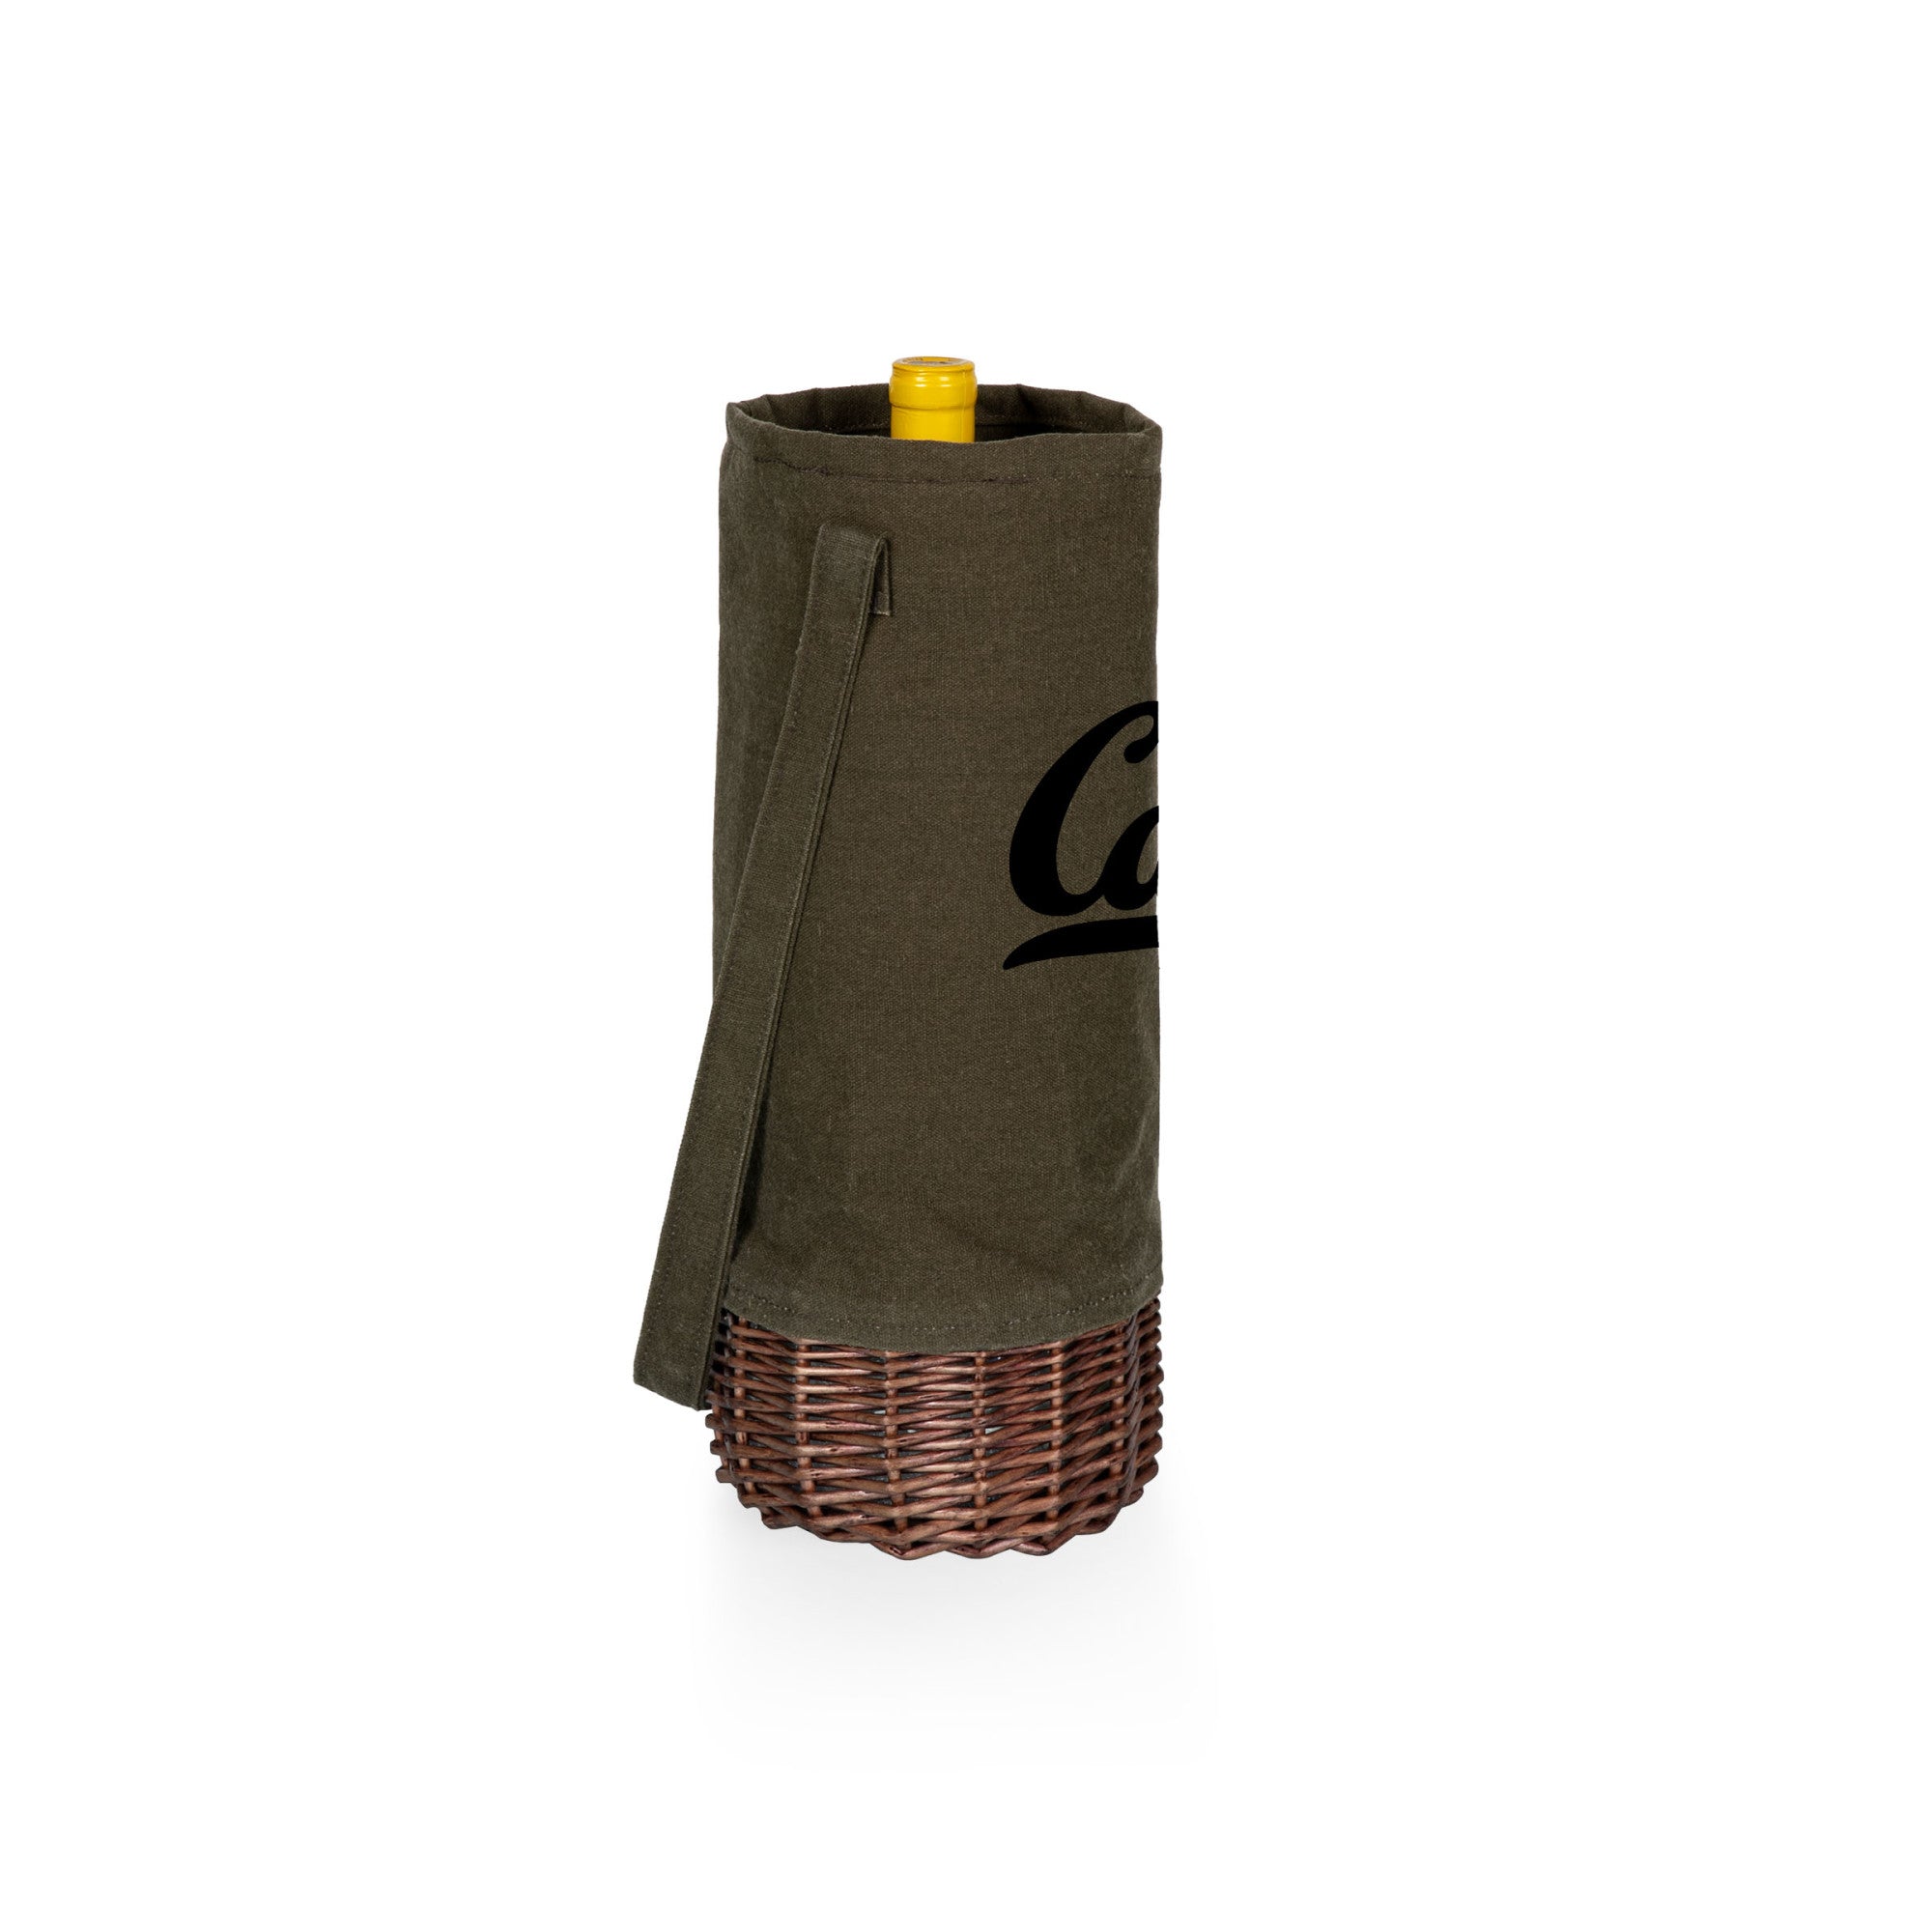 Cal Bears - Malbec Insulated Canvas and Willow Wine Bottle Basket